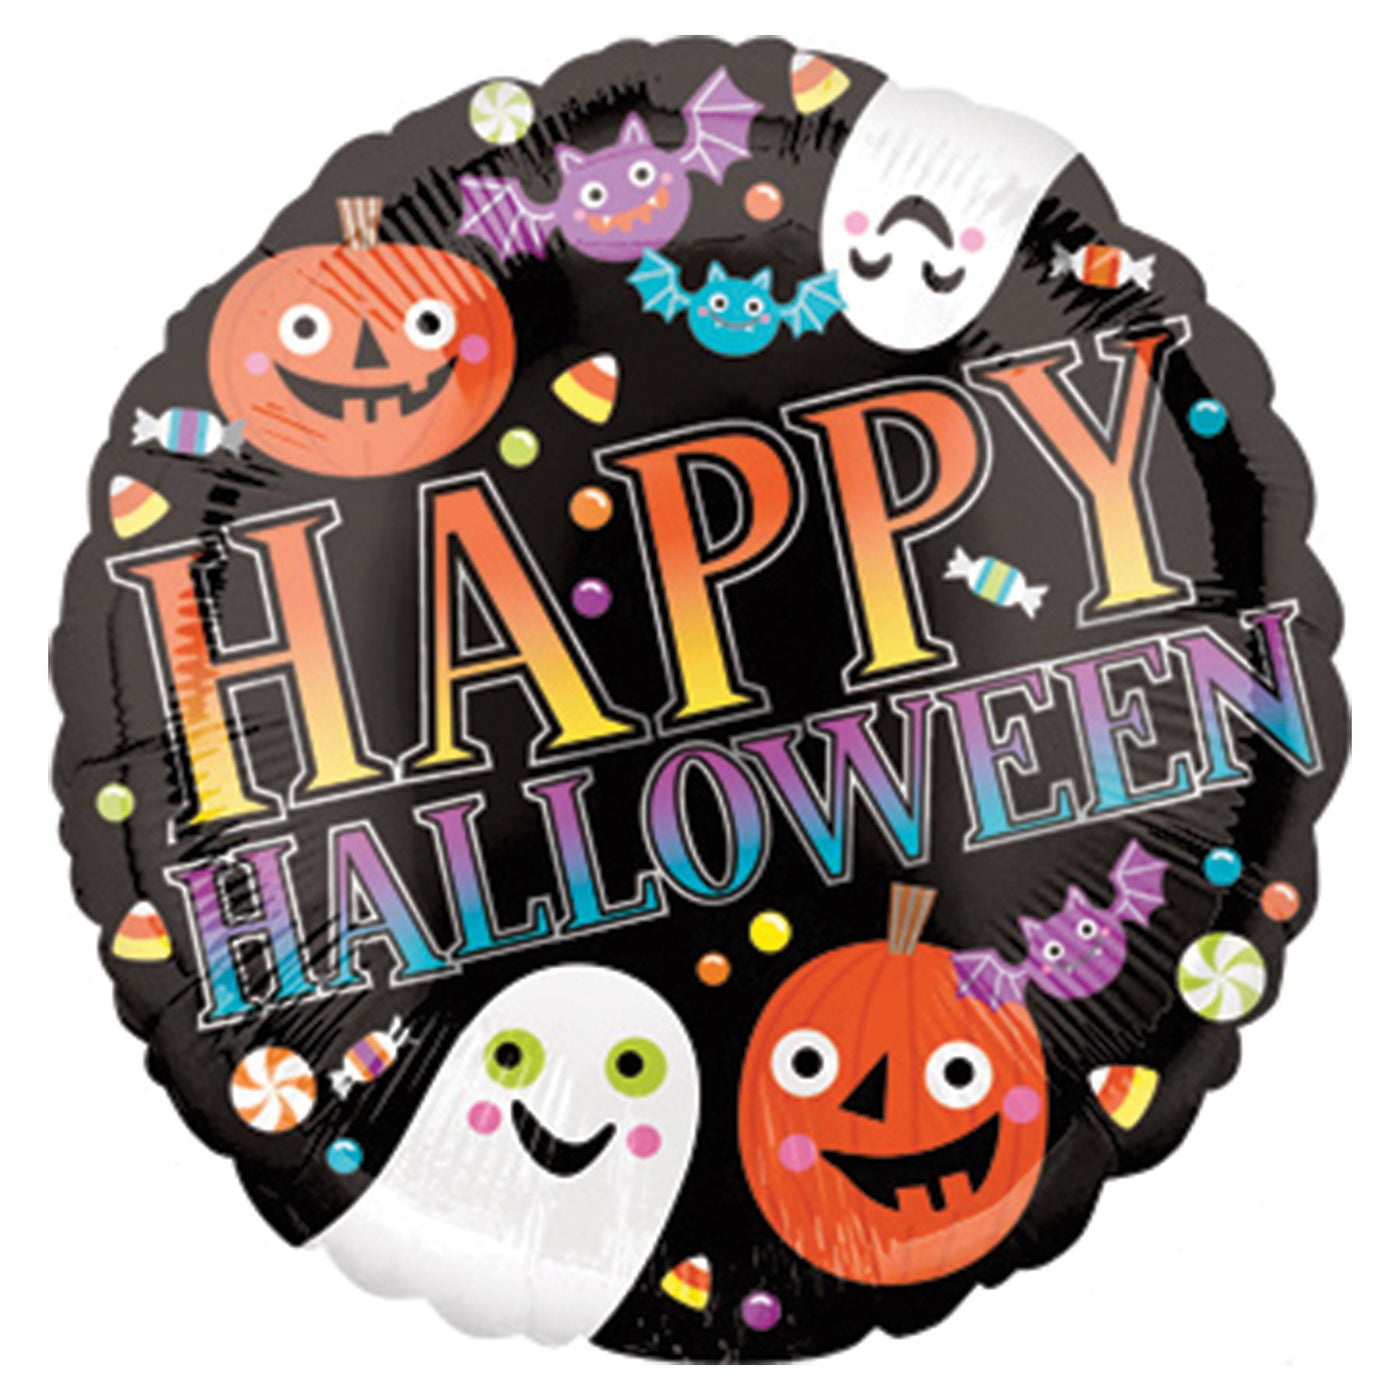 This happy Happy Halloween Mylar balloon is black with cute Halloween figures of ghosts, bats,  and jack-o-lanterns surrounded by an explosion of Halloween candy and the words 'Happy Halloween'